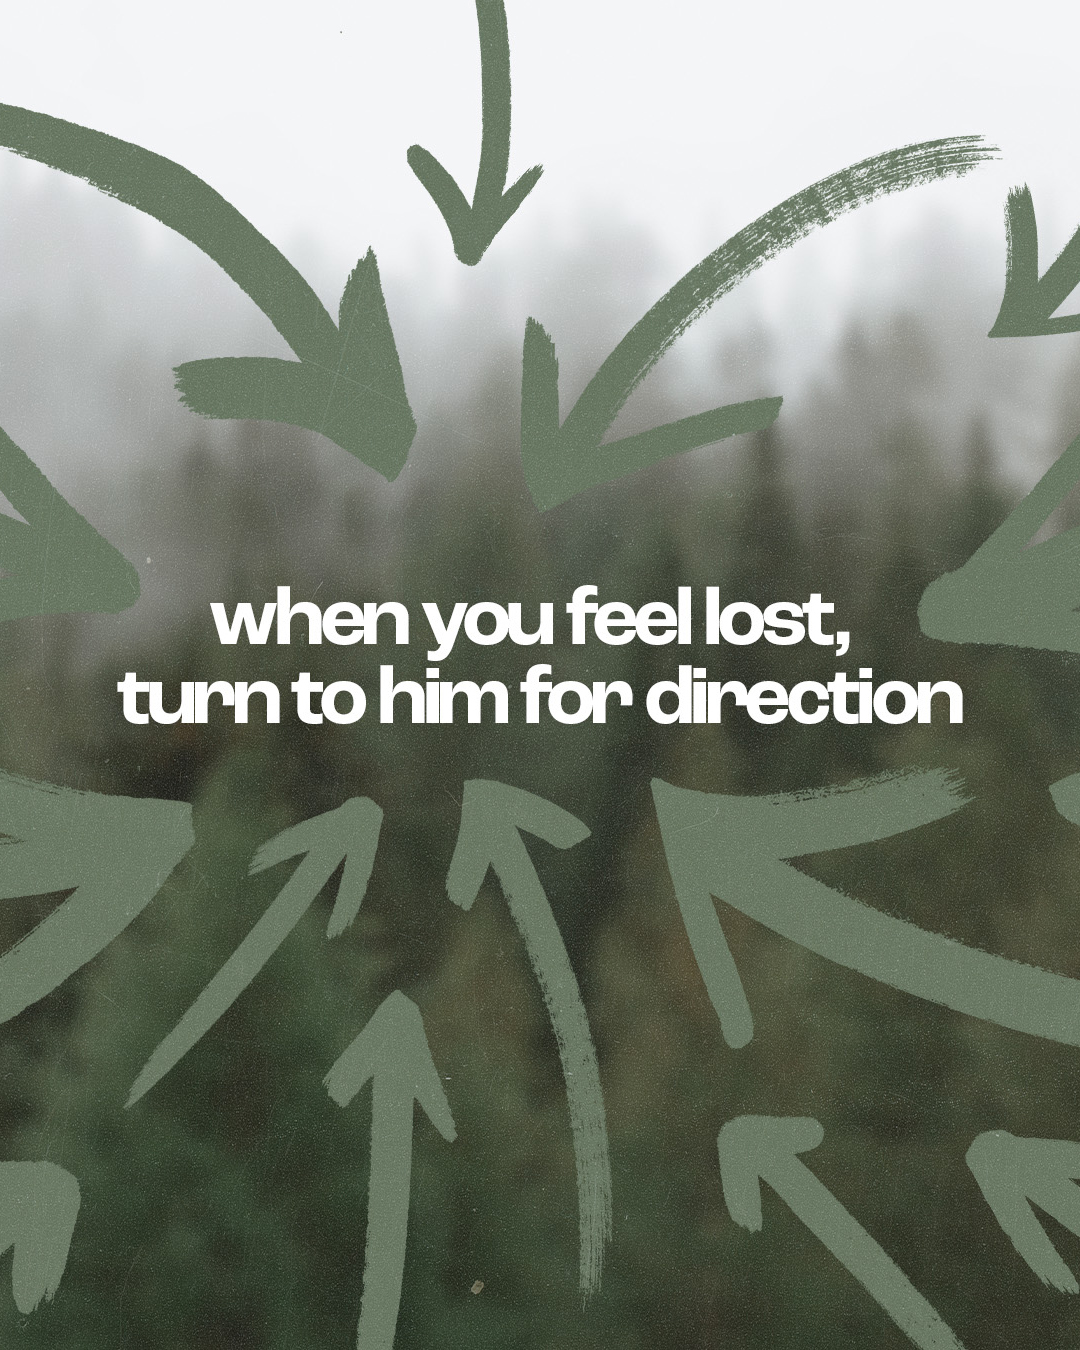 Turn to Him for direction